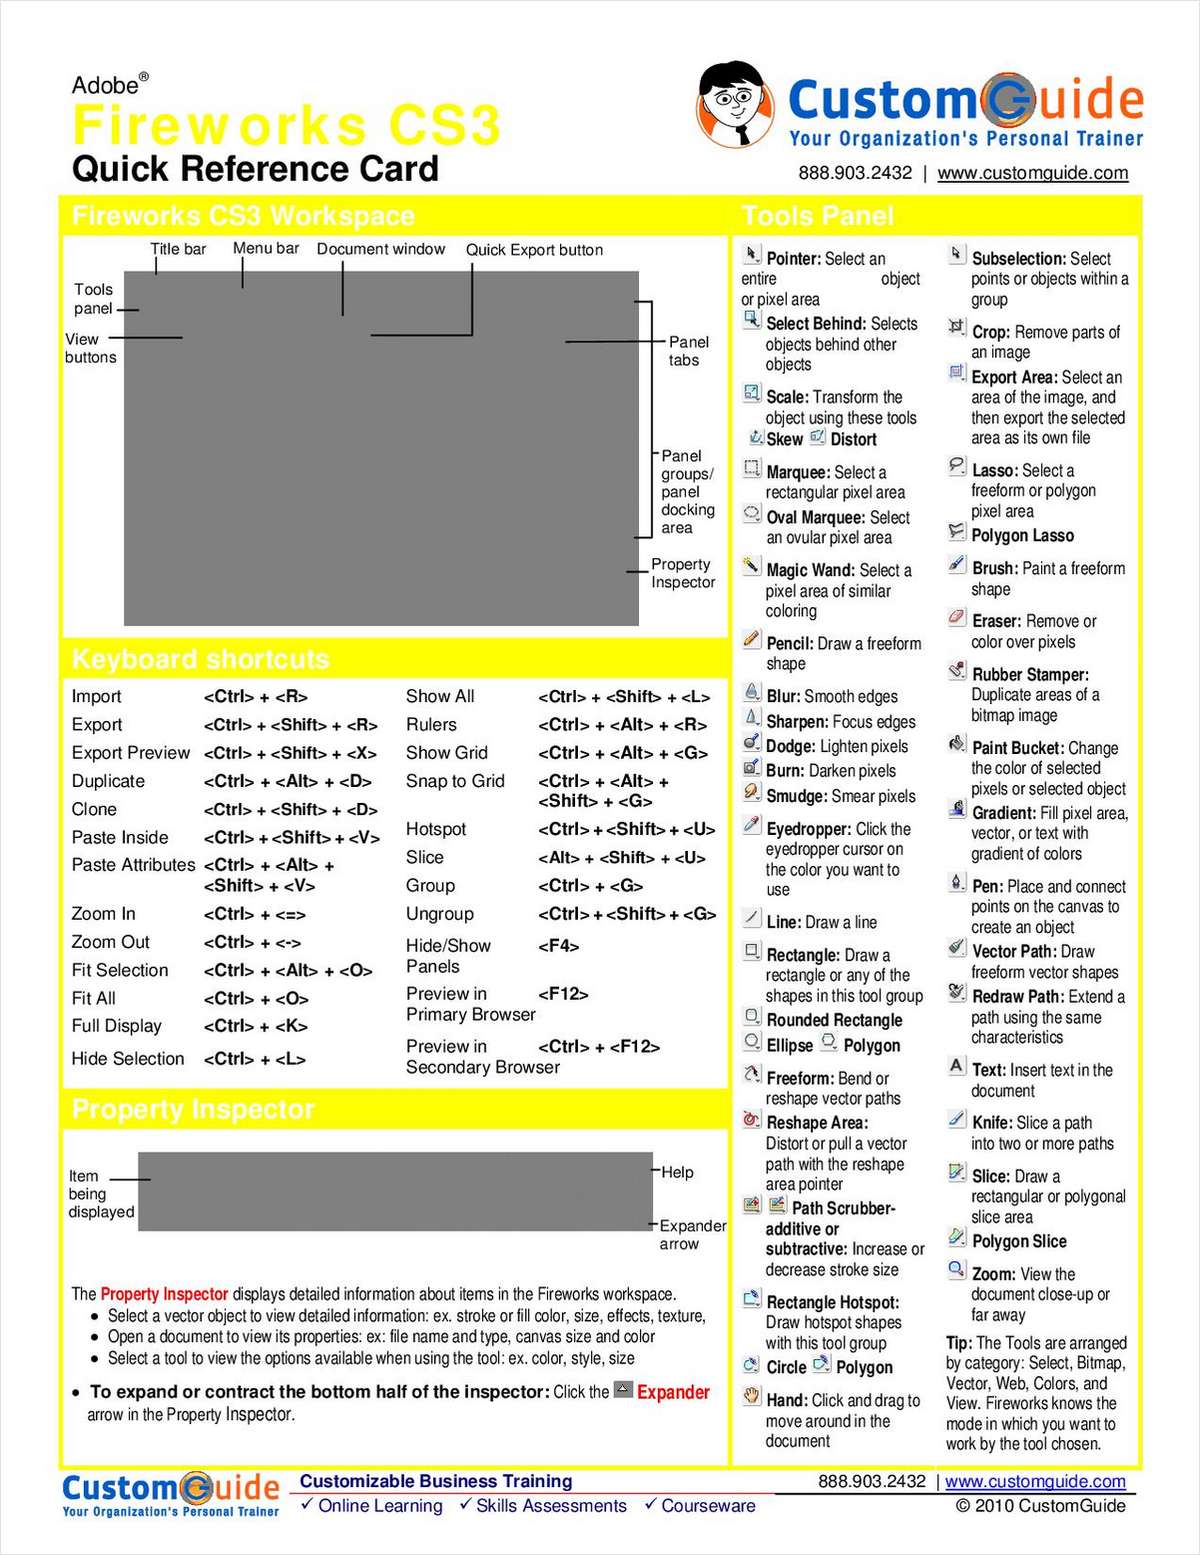 Adobe Fireworks CS3 - Free Quick Reference Card